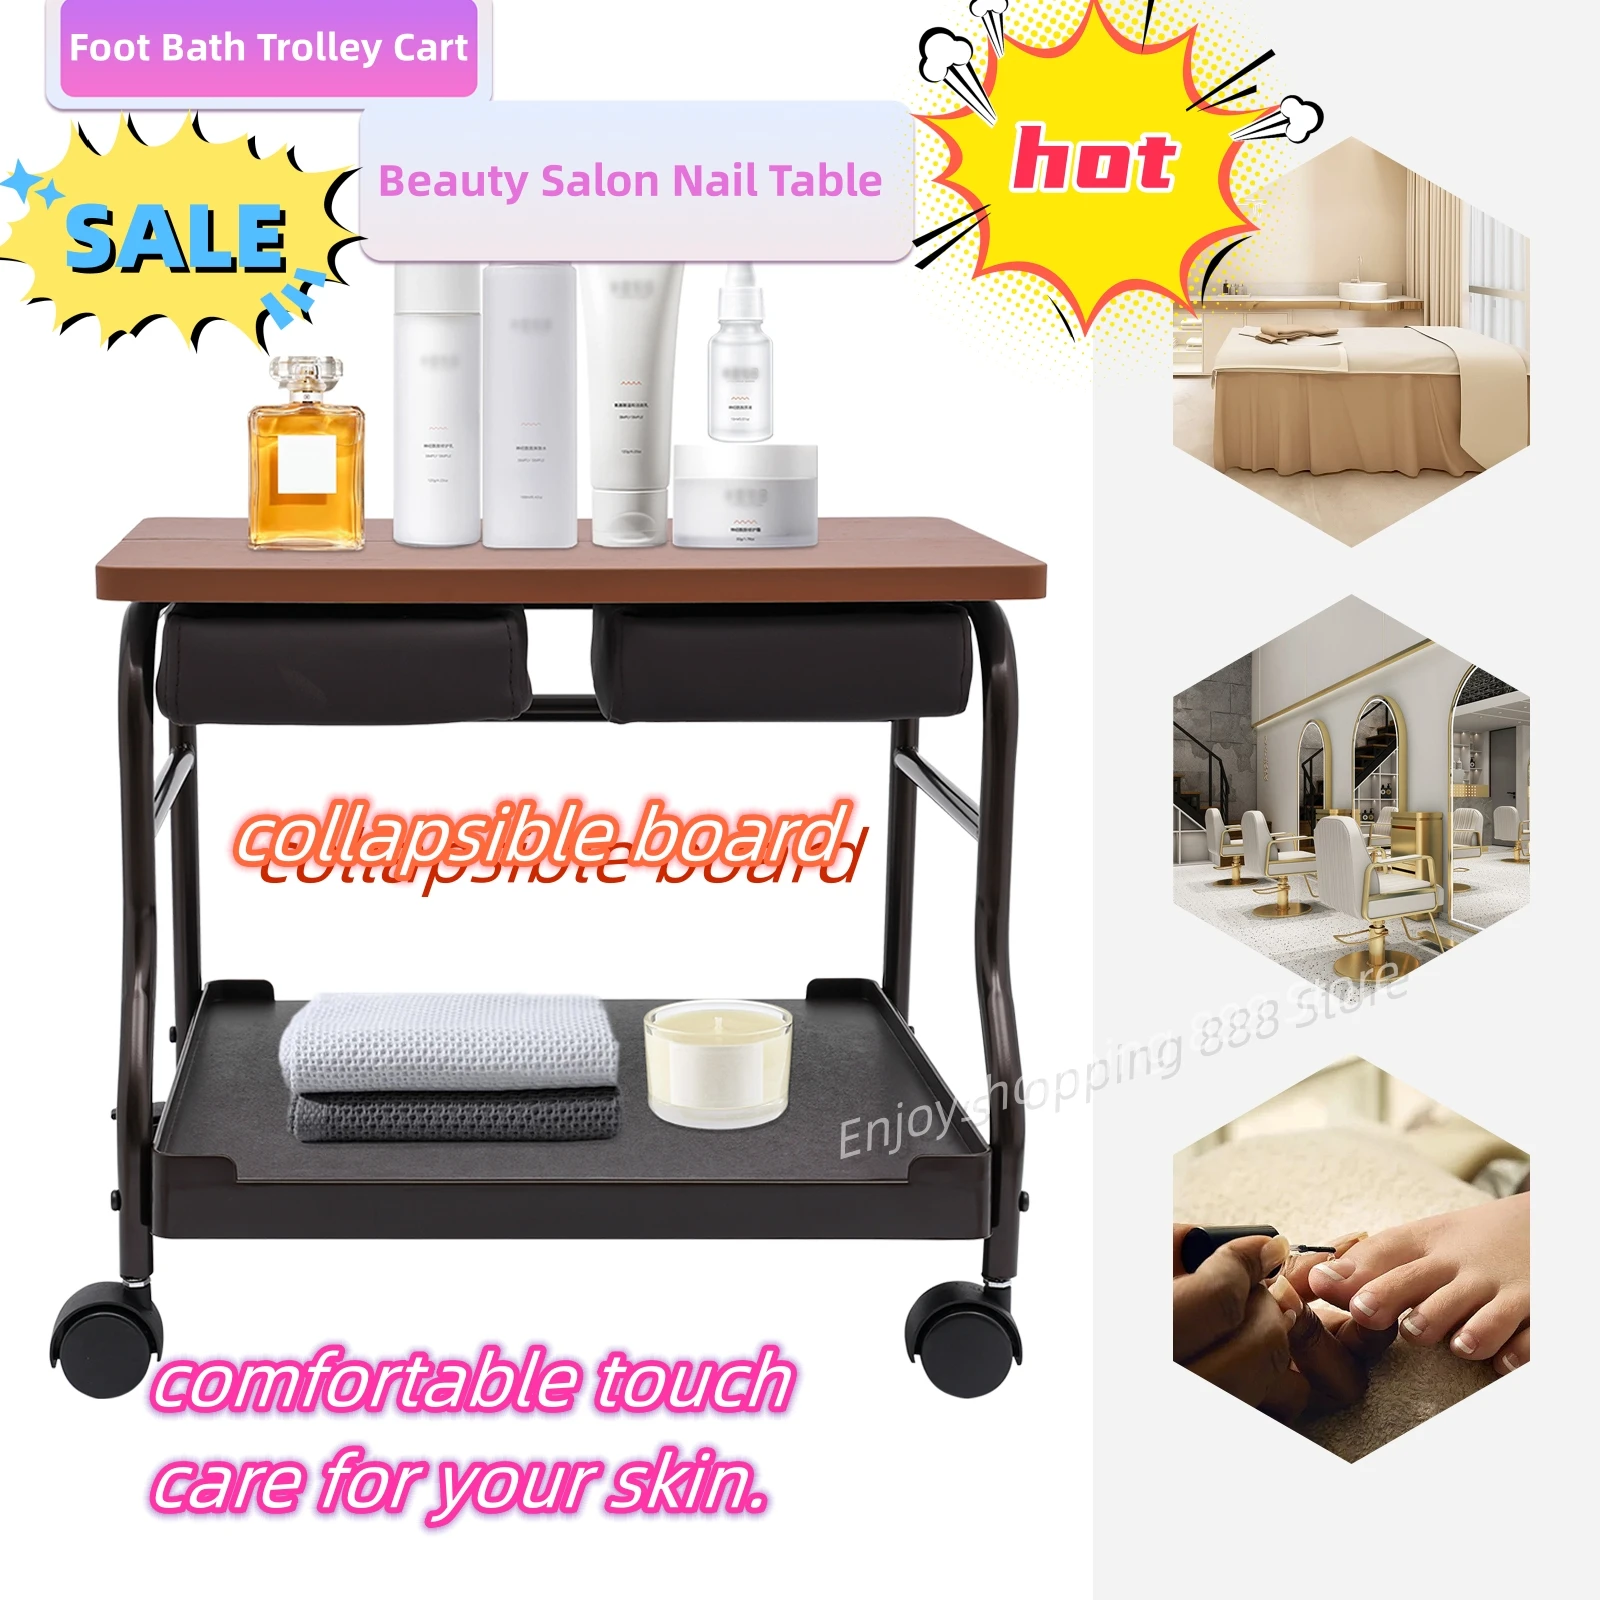 Foot Bath Trolley Cart Beauty Salon Nail Table with Wheels & Storage Rack for Massage Rest Pedicure Load 39.7lbs aluminum salon cart rack with wheels hairdressing